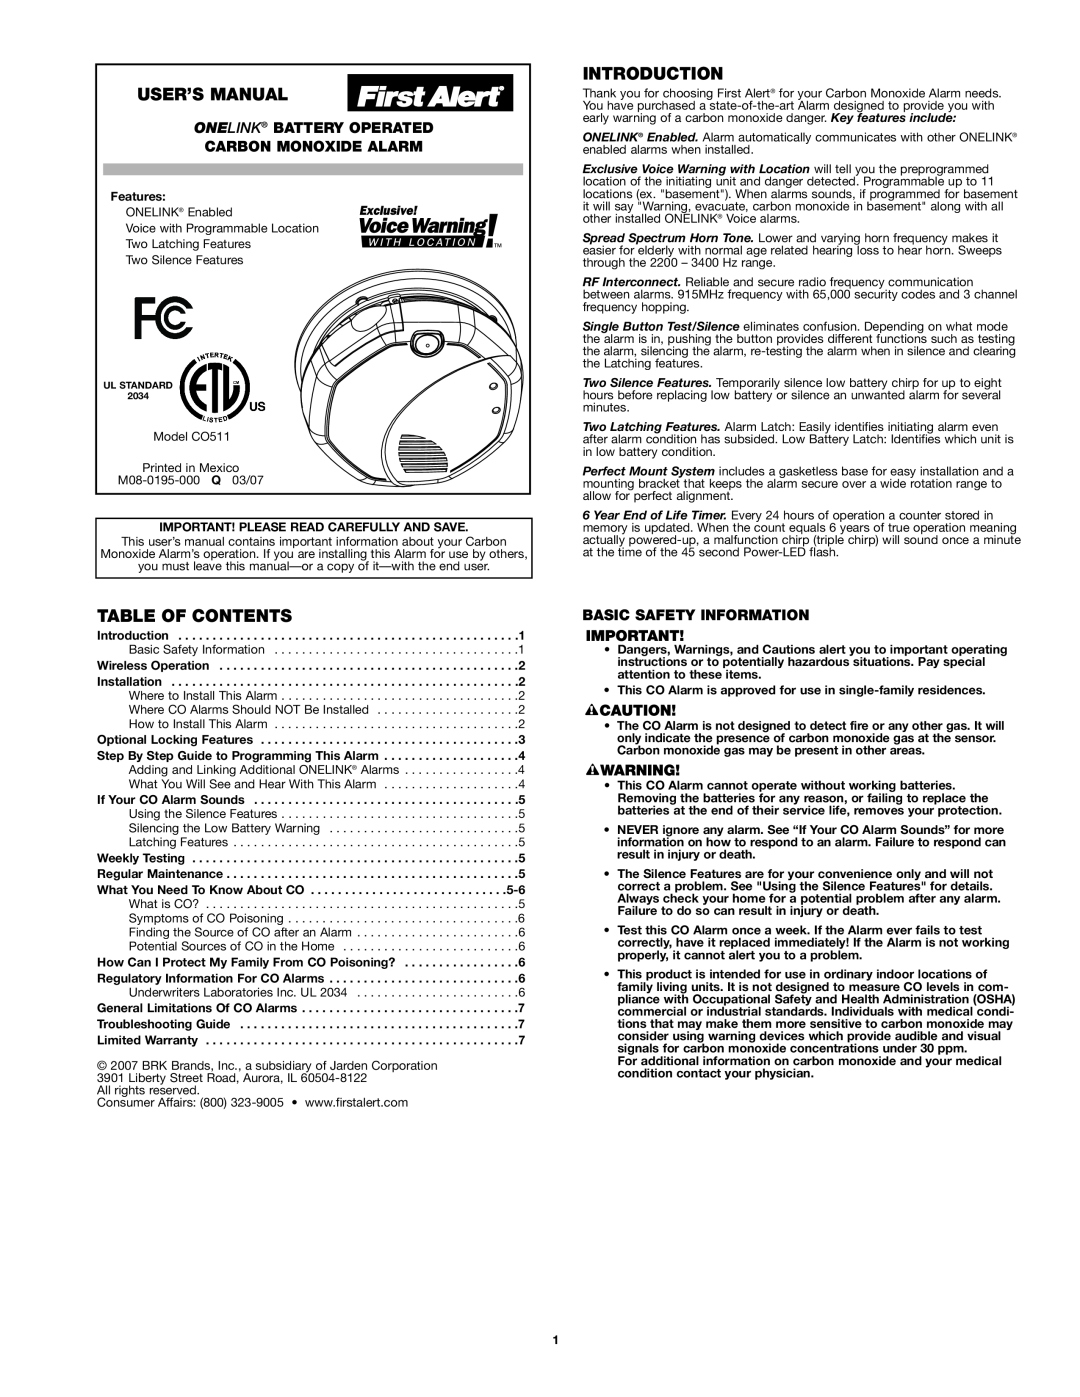 First Alert CO511CN user manual Introduction, Table Of Contents, Onelink Battery Operated, Carbon Monoxide Alarm 